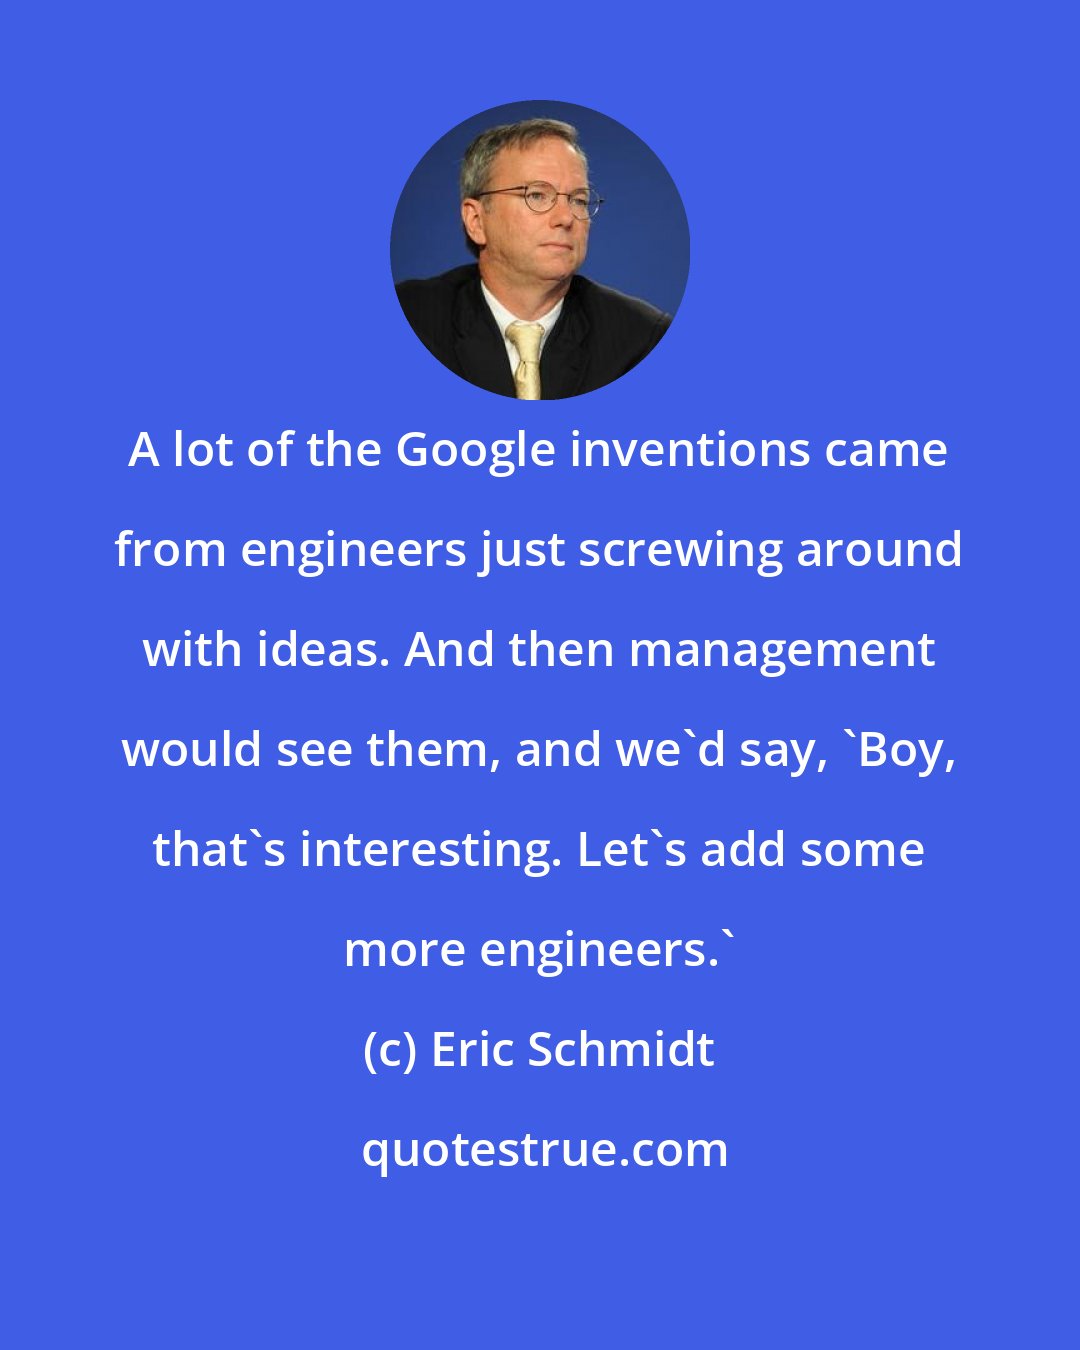 Eric Schmidt: A lot of the Google inventions came from engineers just screwing around with ideas. And then management would see them, and we'd say, 'Boy, that's interesting. Let's add some more engineers.'